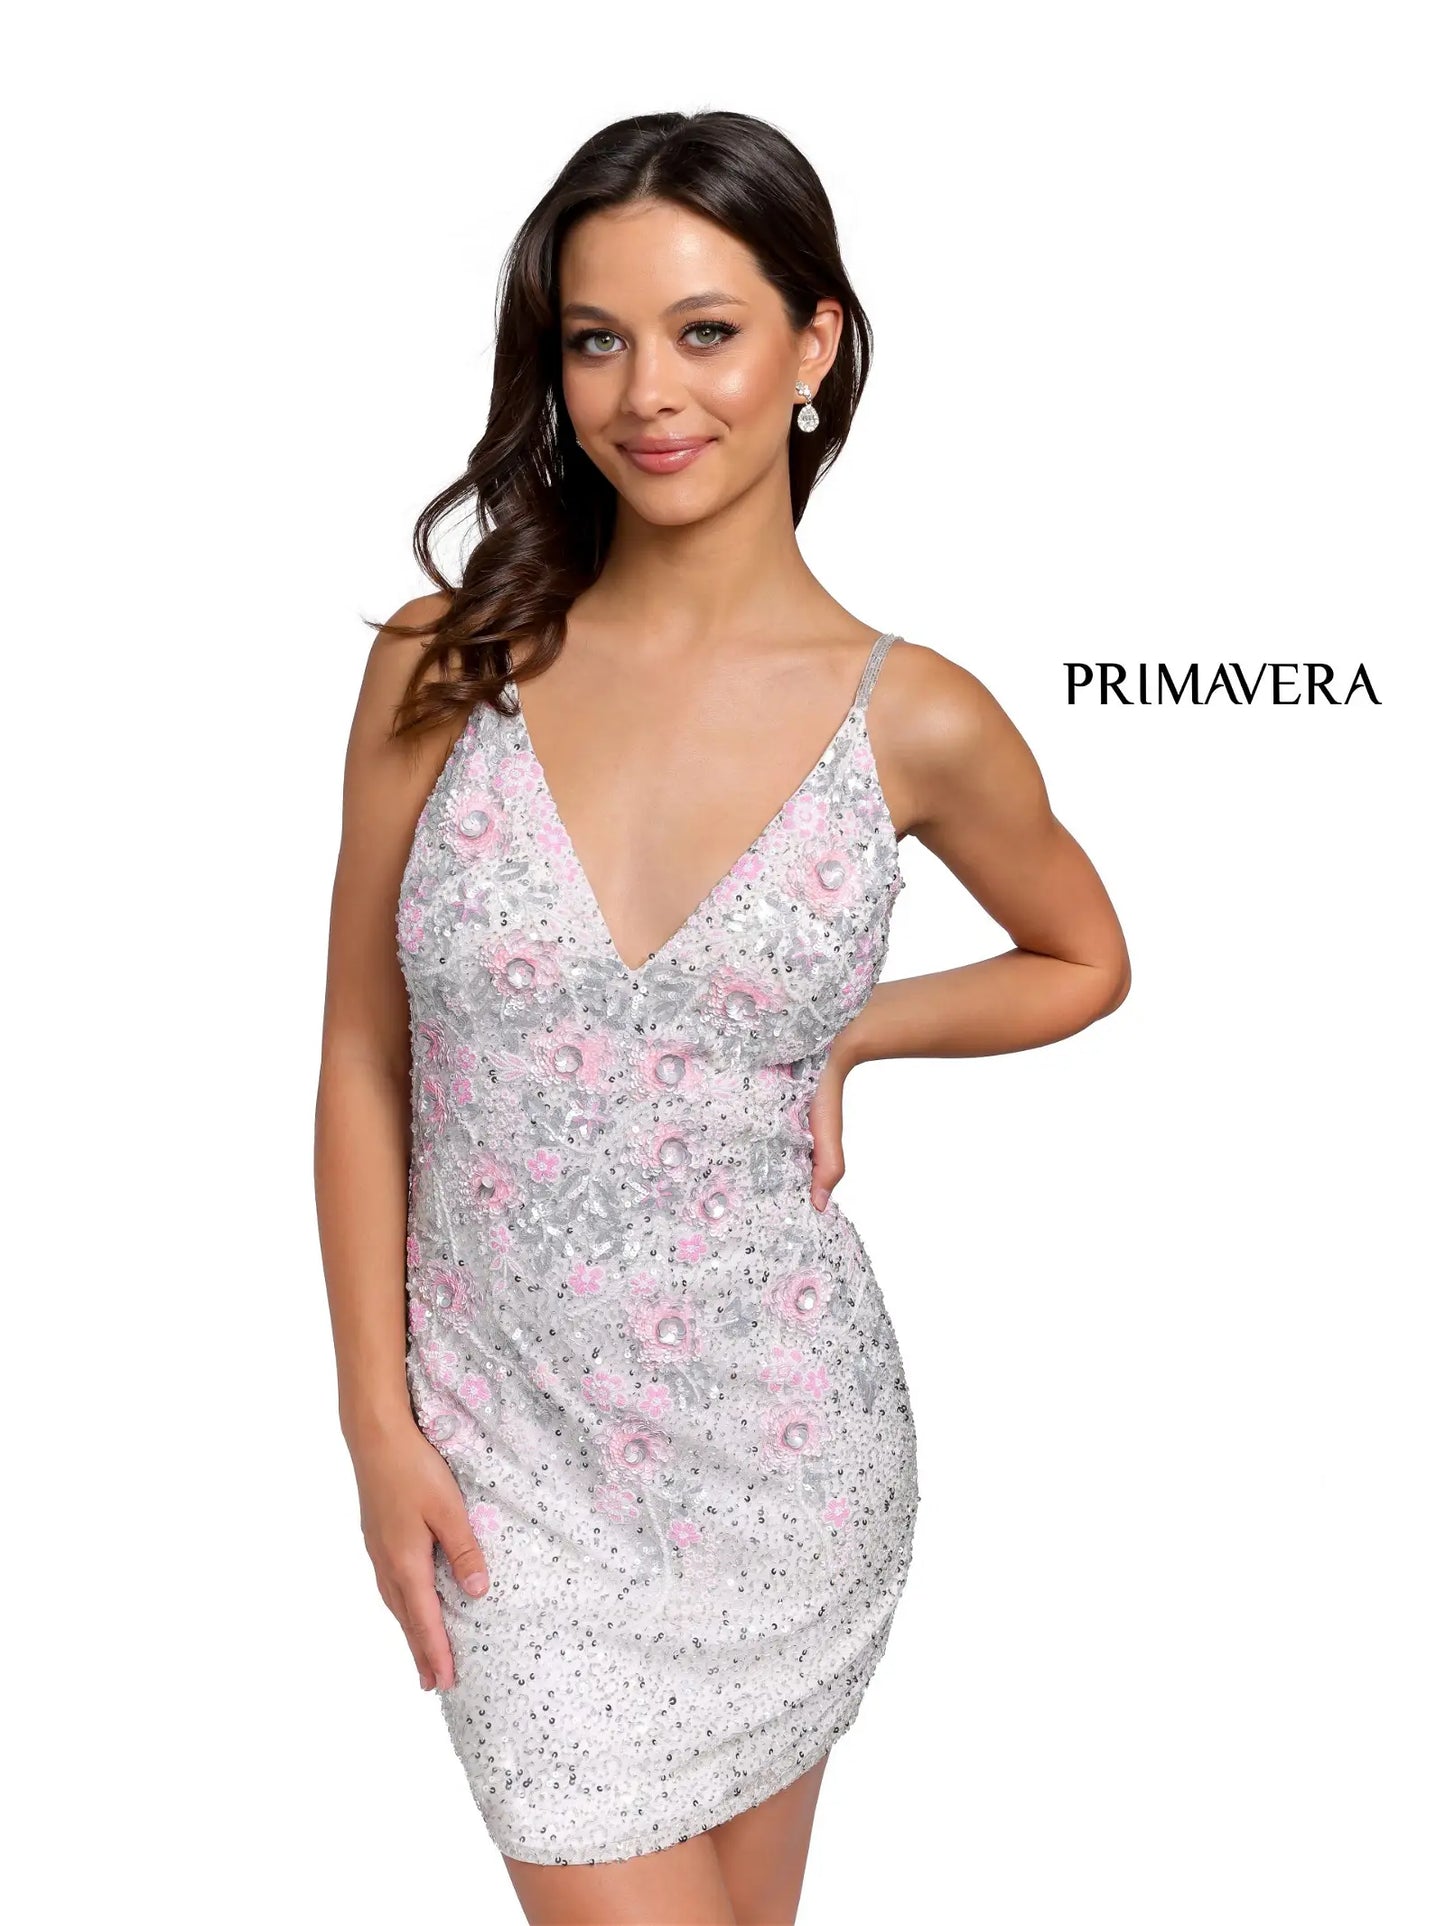 Primavera Couture 3862 Short 2022 Homecoming dress Fitted sequin beaded short cocktail dress.  Ivory Multi size 6  Available Color-  Ivory Multi